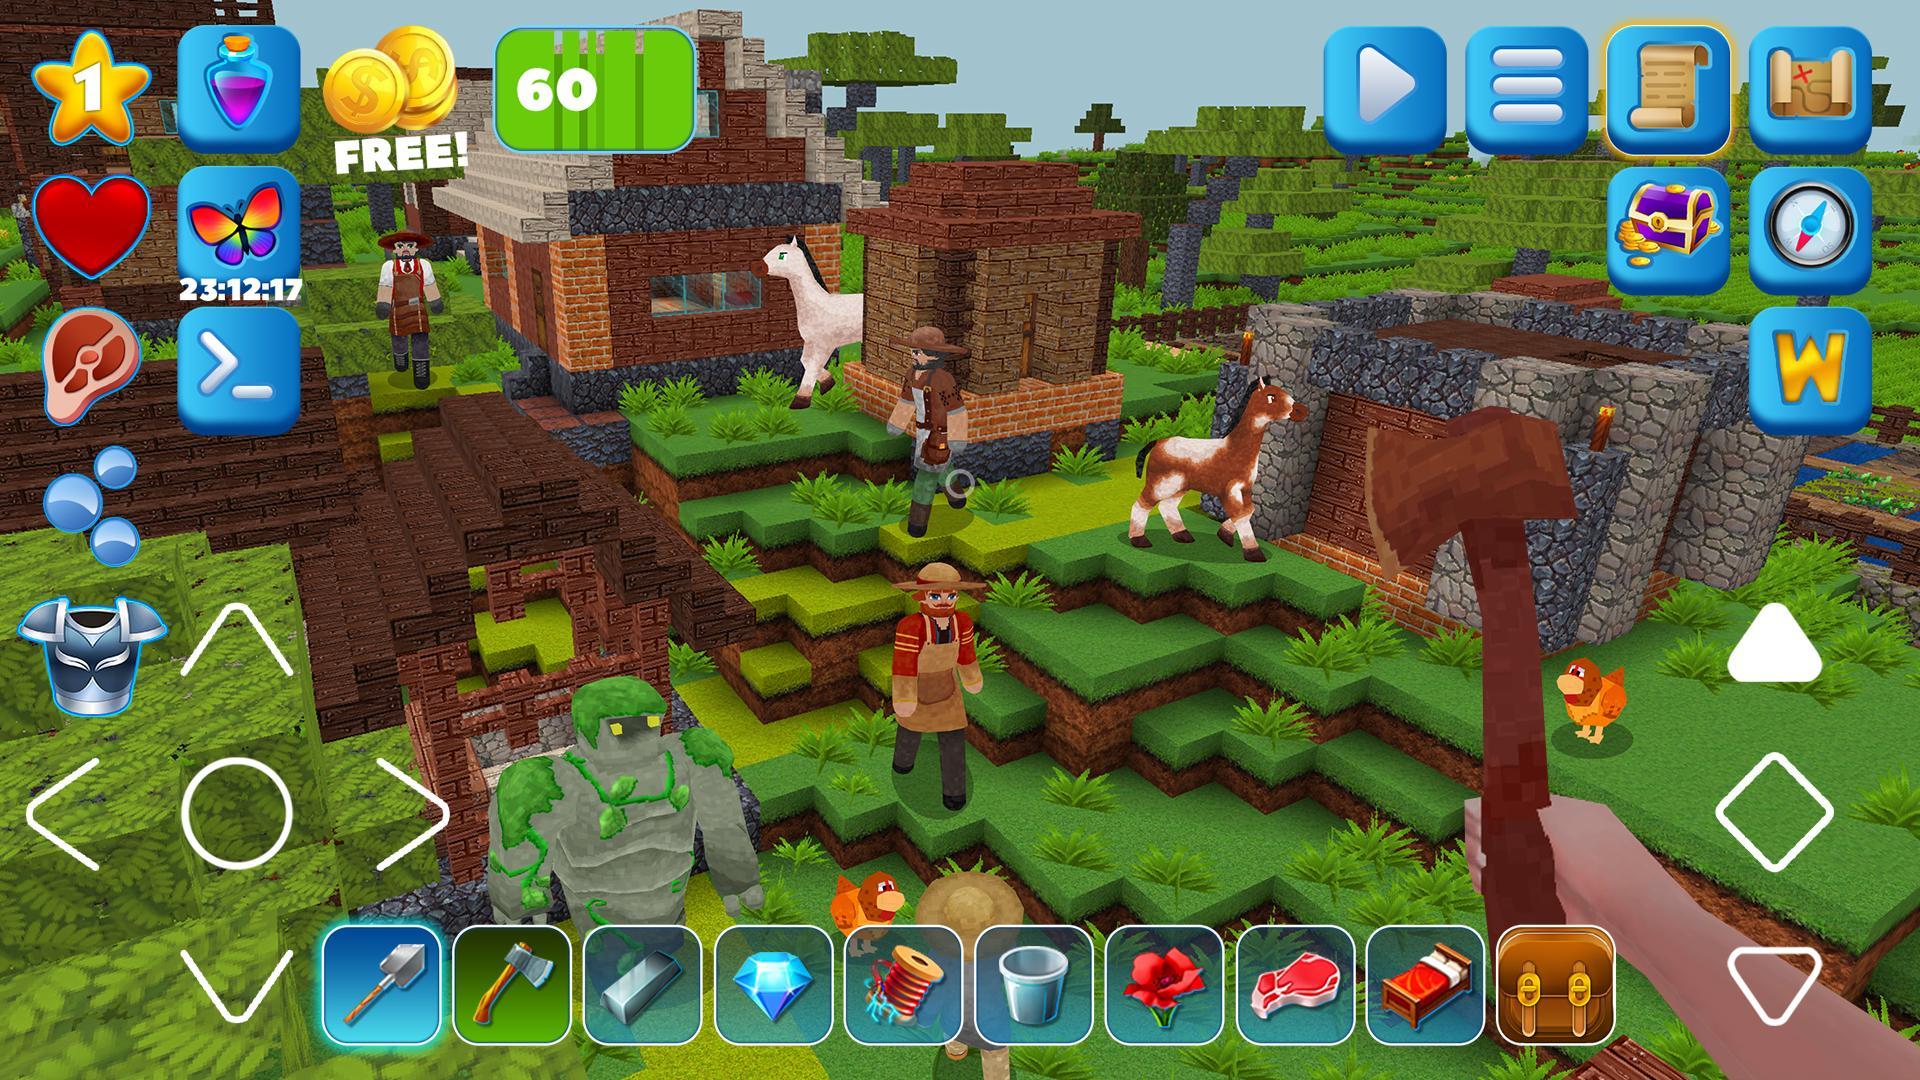 Adventurecraft For Android Apk Download - build to survive black people roblox